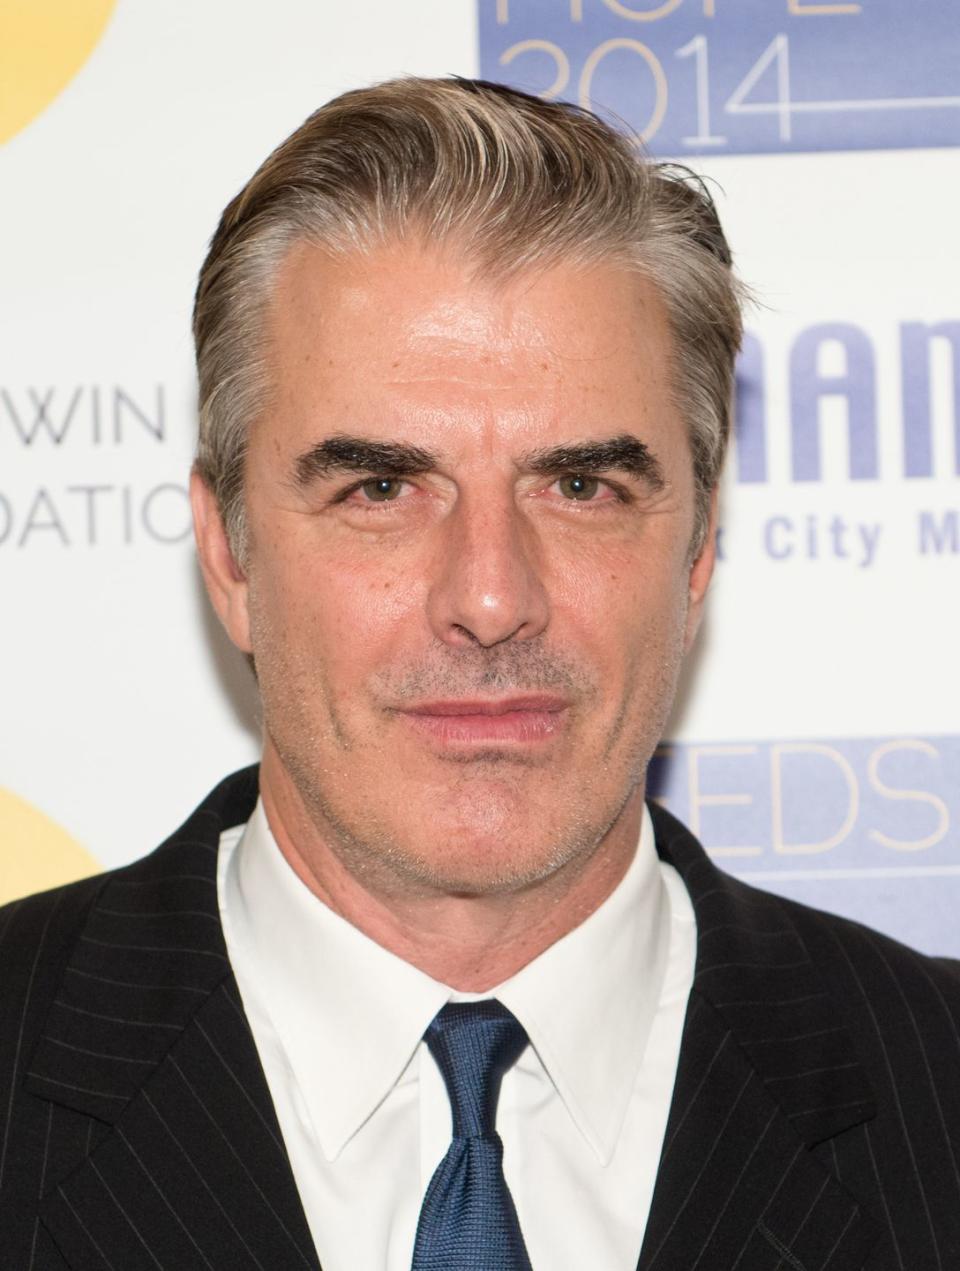 Now: Chris Noth